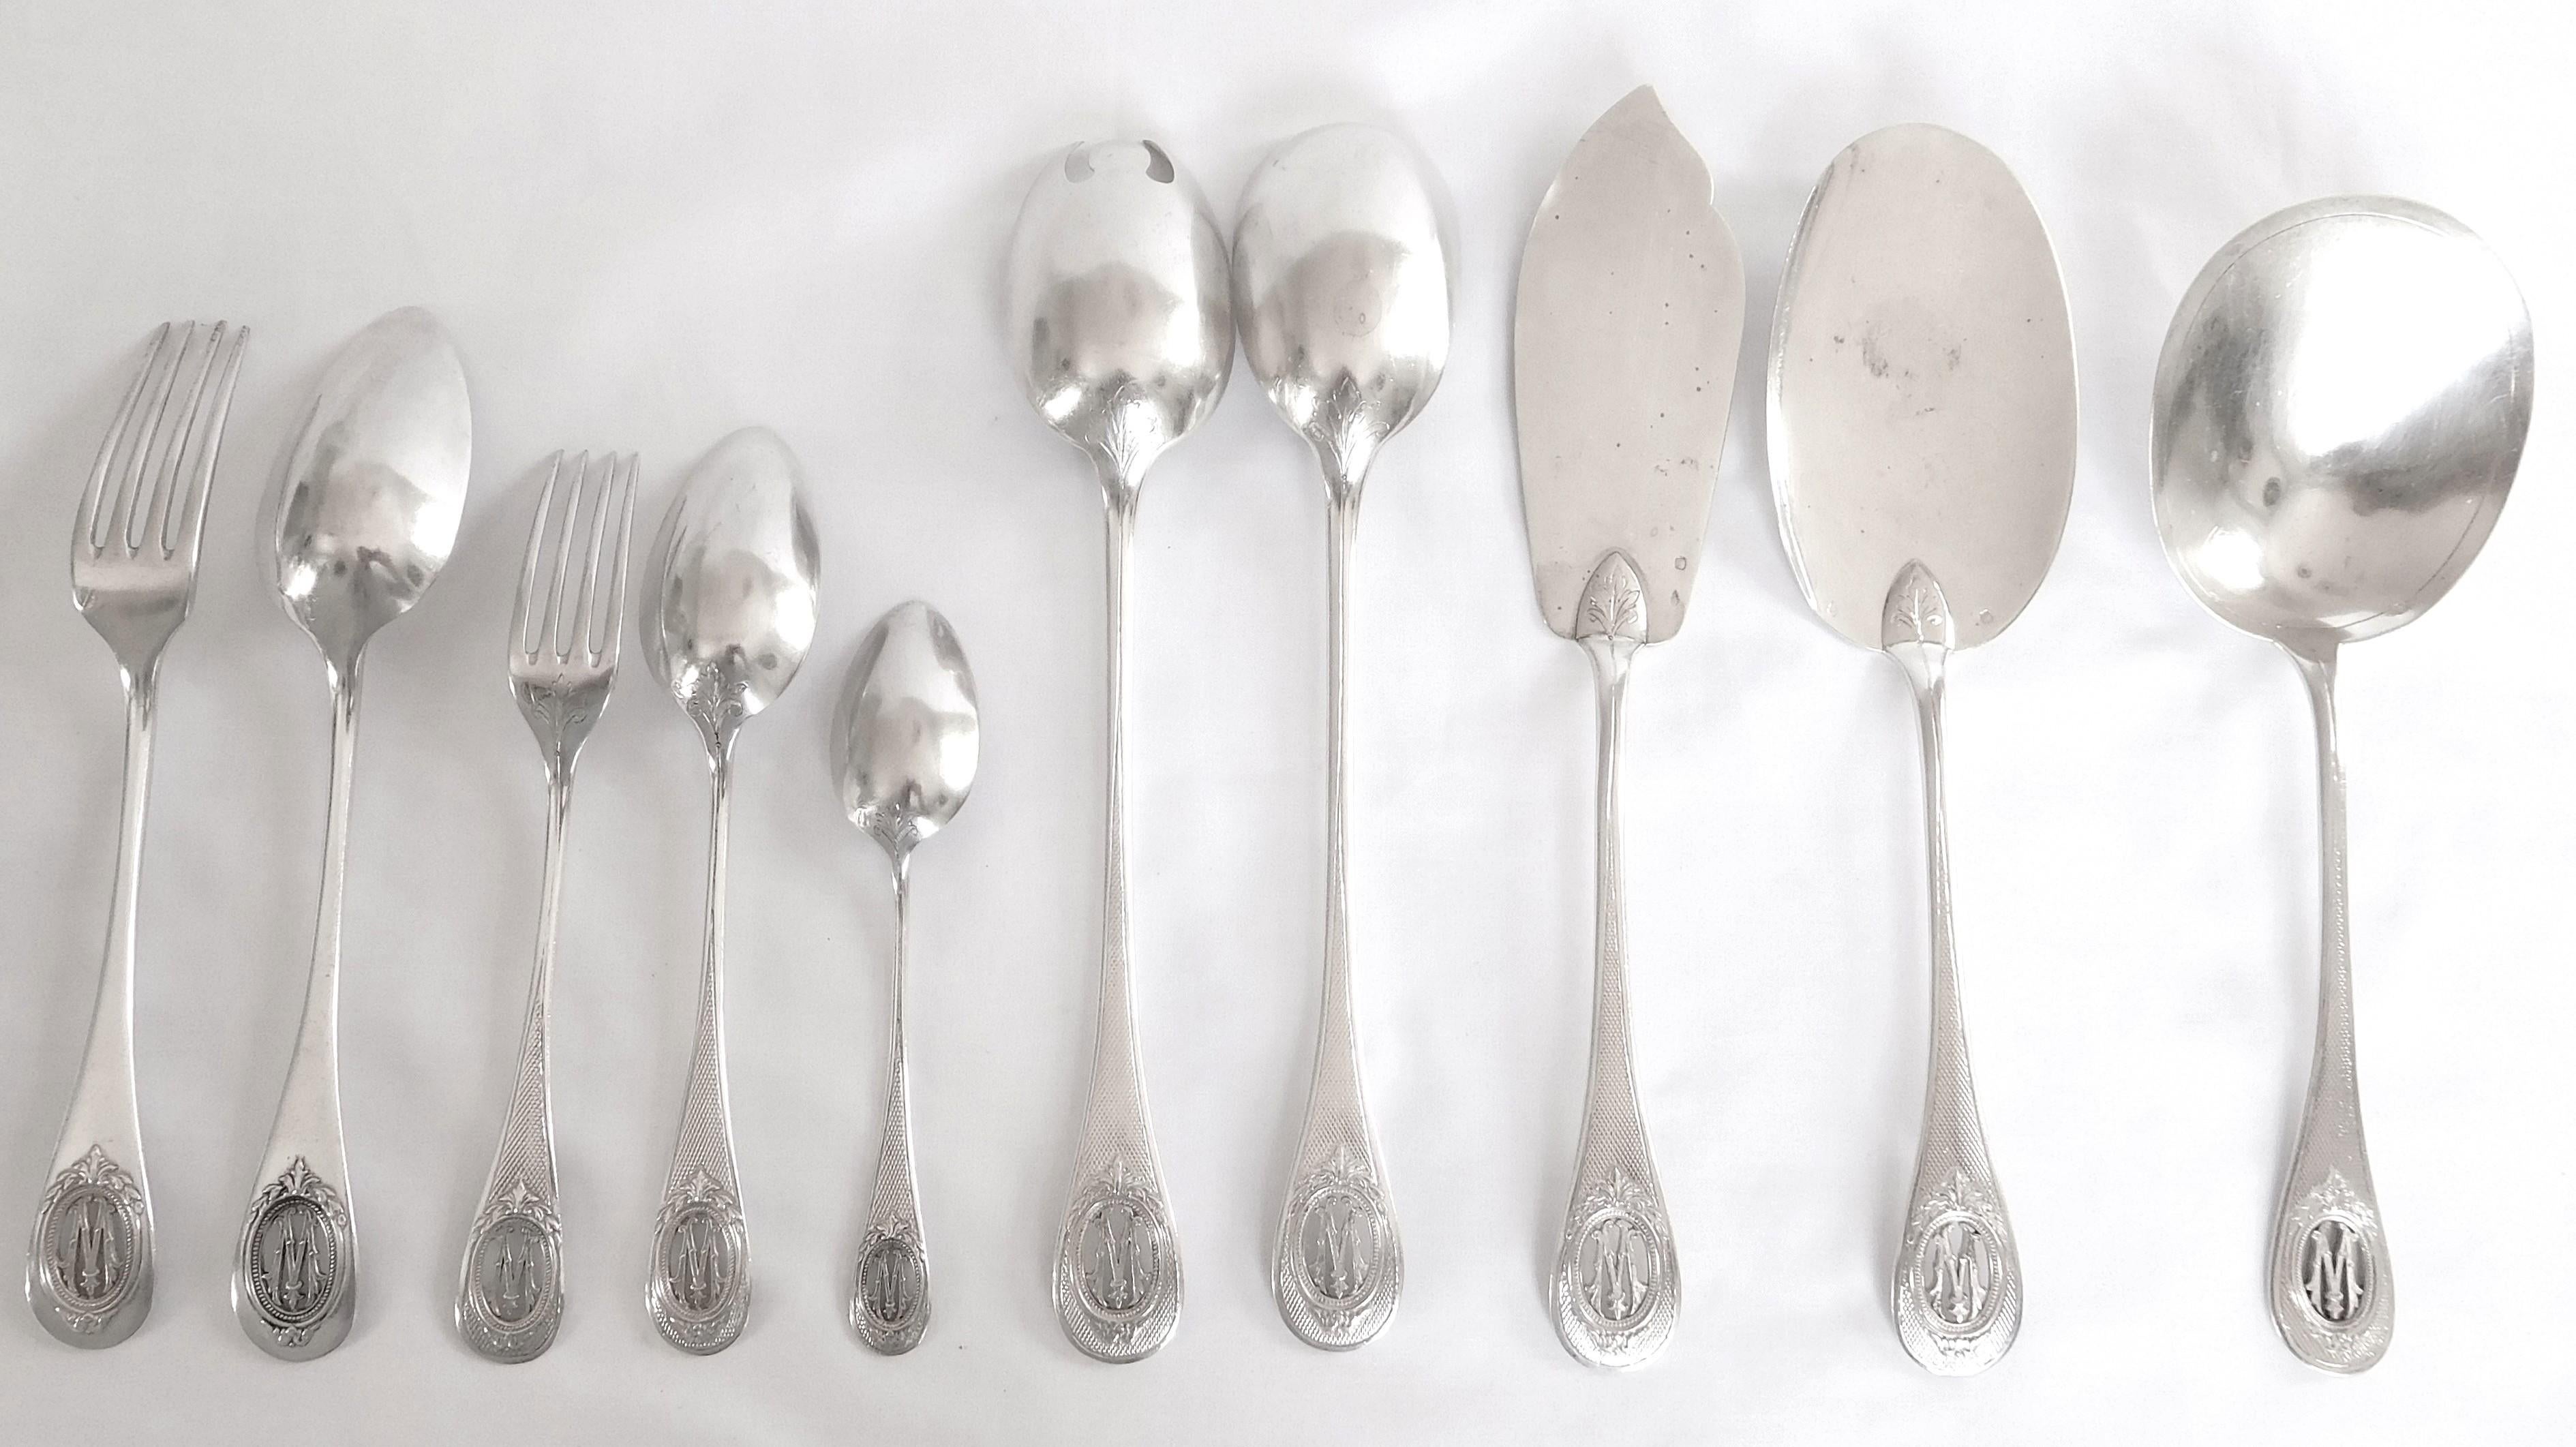 Stunning Louis XVI style sterling silver flatware for 18, 95 pieces composed of :
- 18 table forks and 18 table spoons
- 18 dessert forks and 18 dessert spoons
- 18 coffee spoons
- 1 salad serving set
- 1 strawberry serving spoon
- 1 icecream